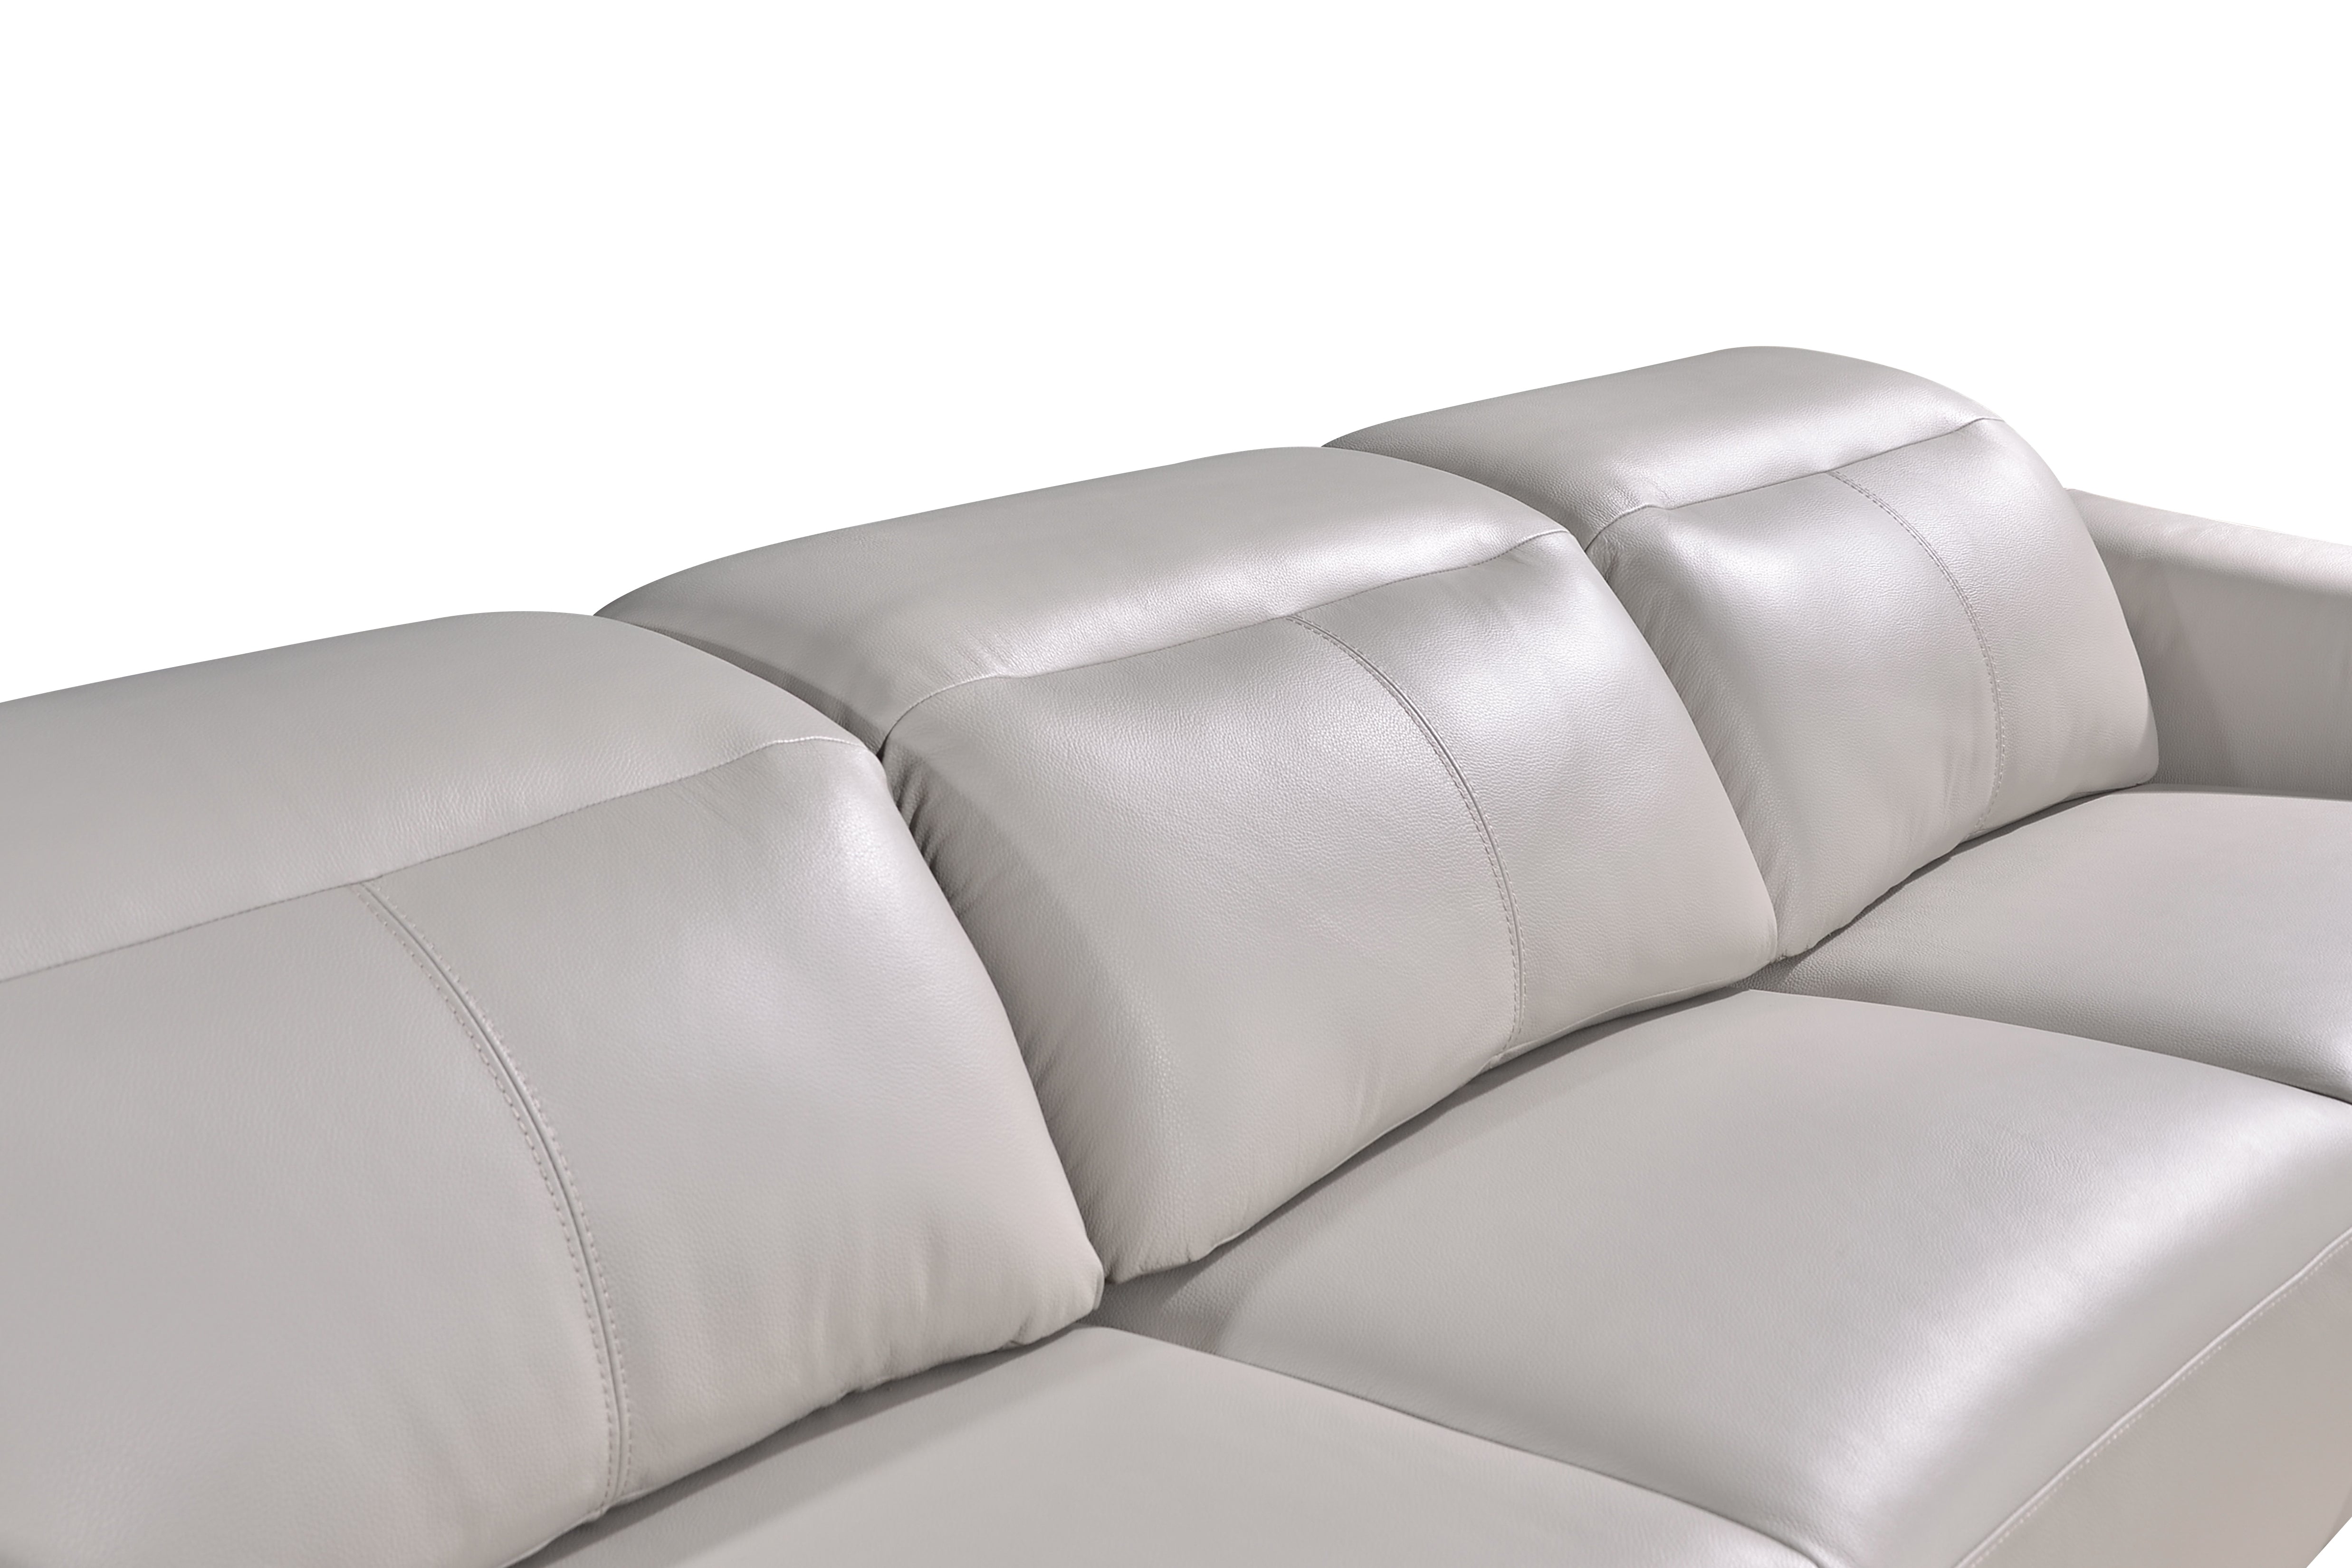 VINCI 3.5 Seater Recliner Sofa in Leather by Castilla